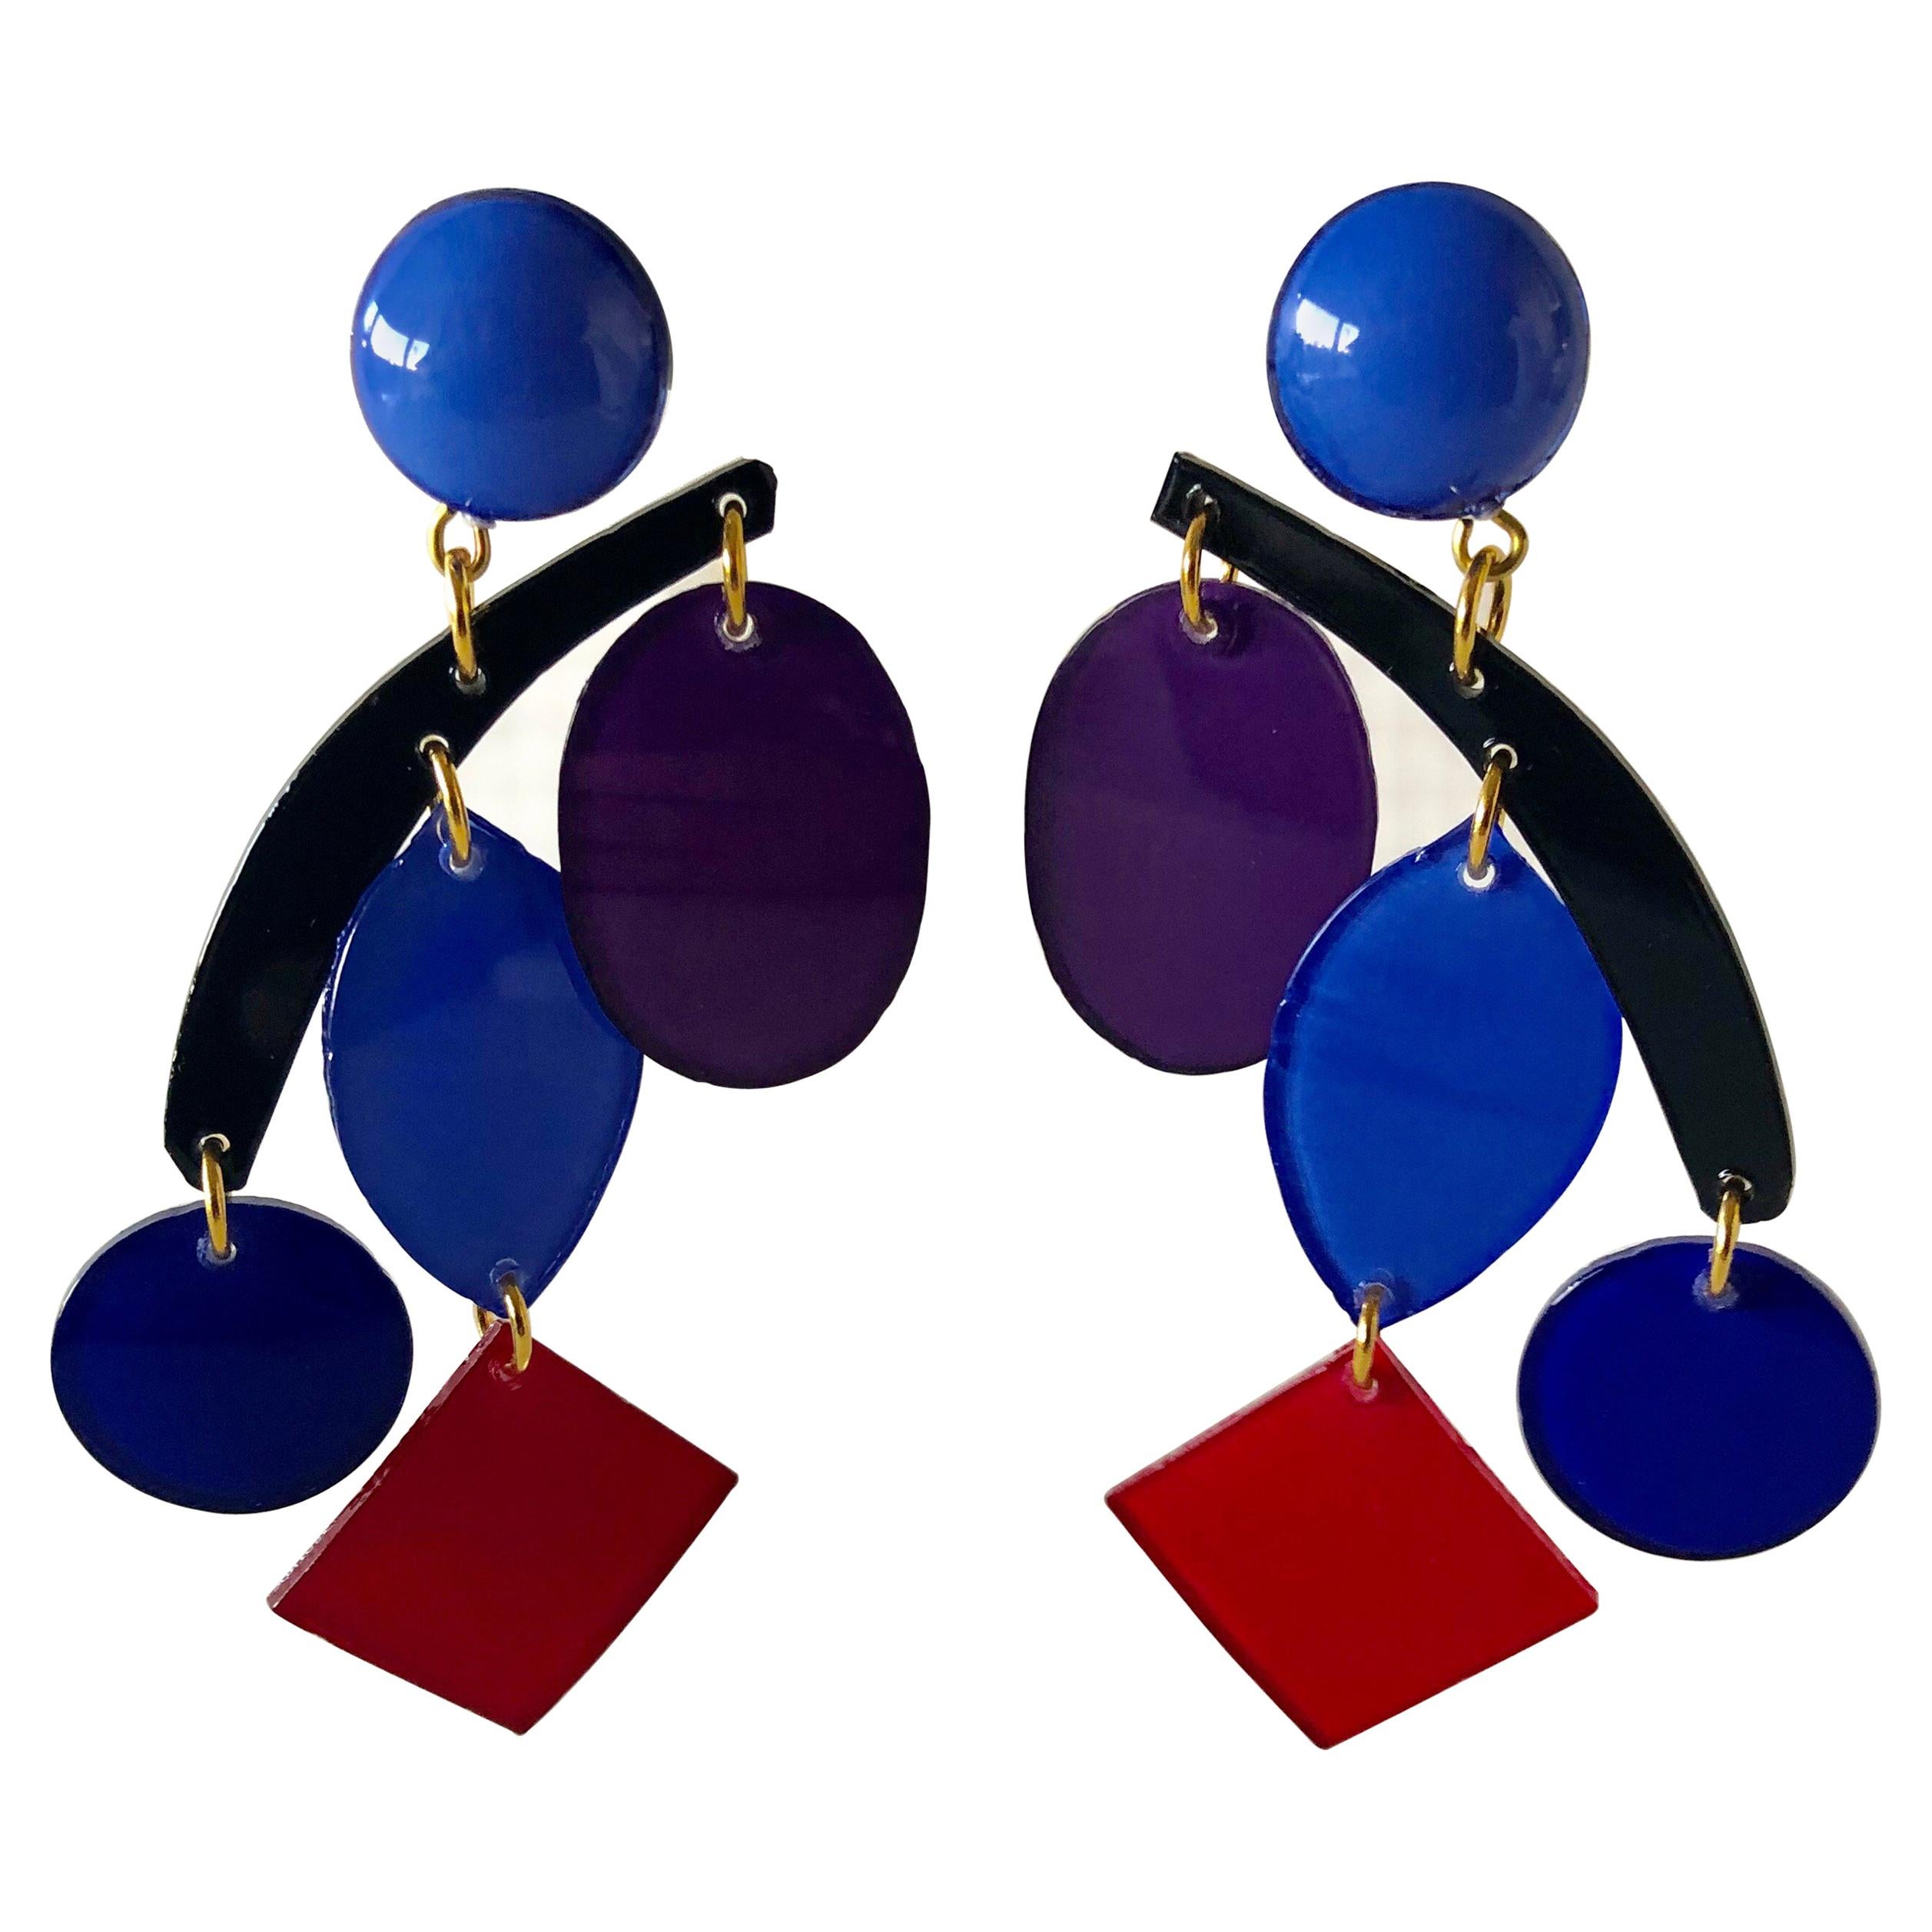 Colorful Modern Mobile Sculpture Statement Earrings 